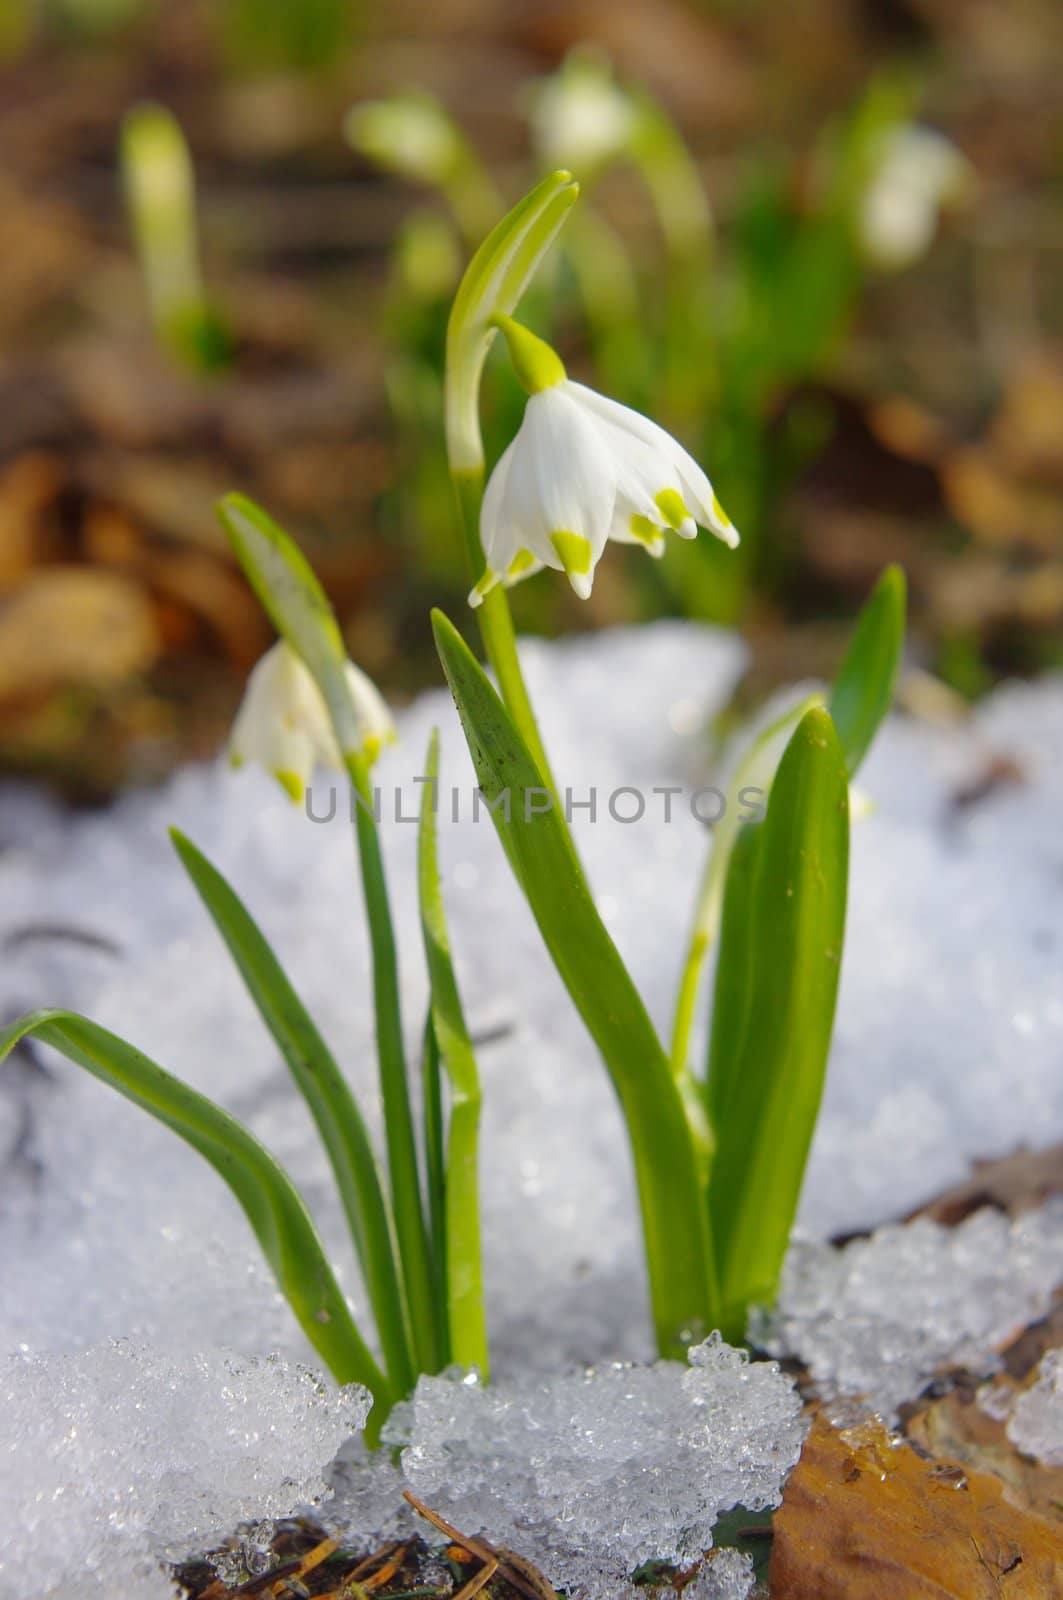 snowdrop spring snowflake lilies of the valley